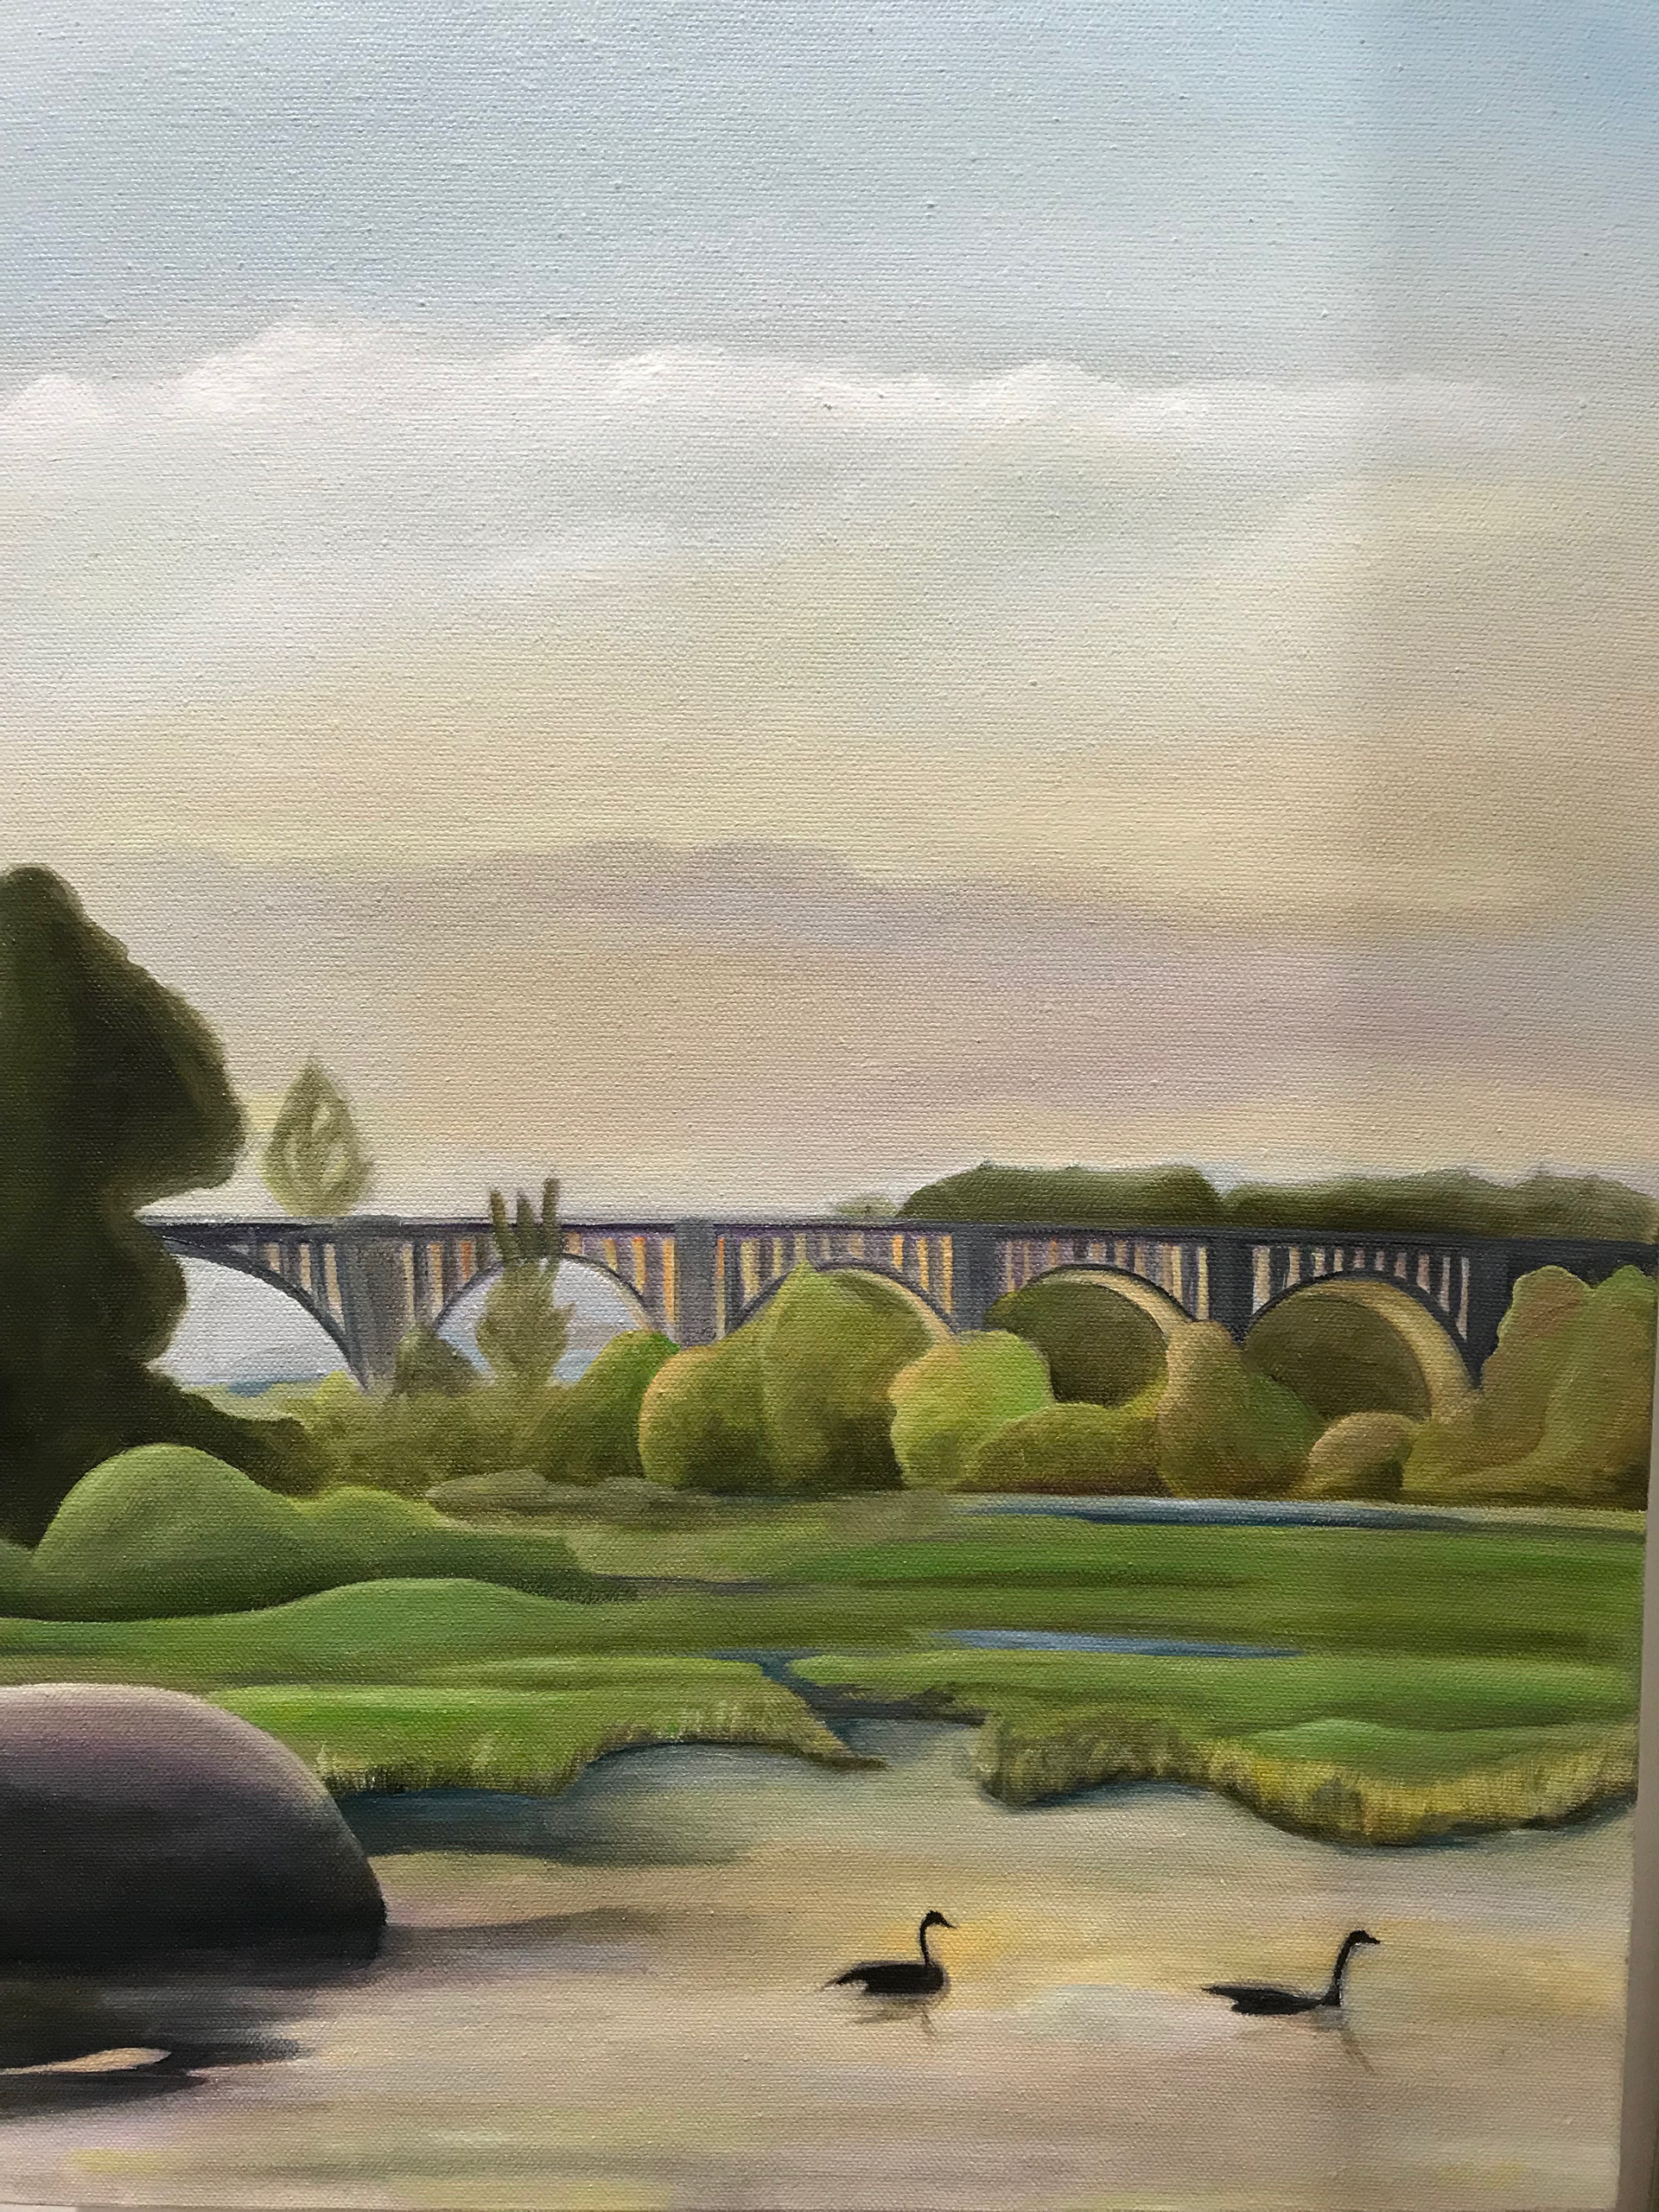 Evening By The Railroad Bridge by Emma Knight